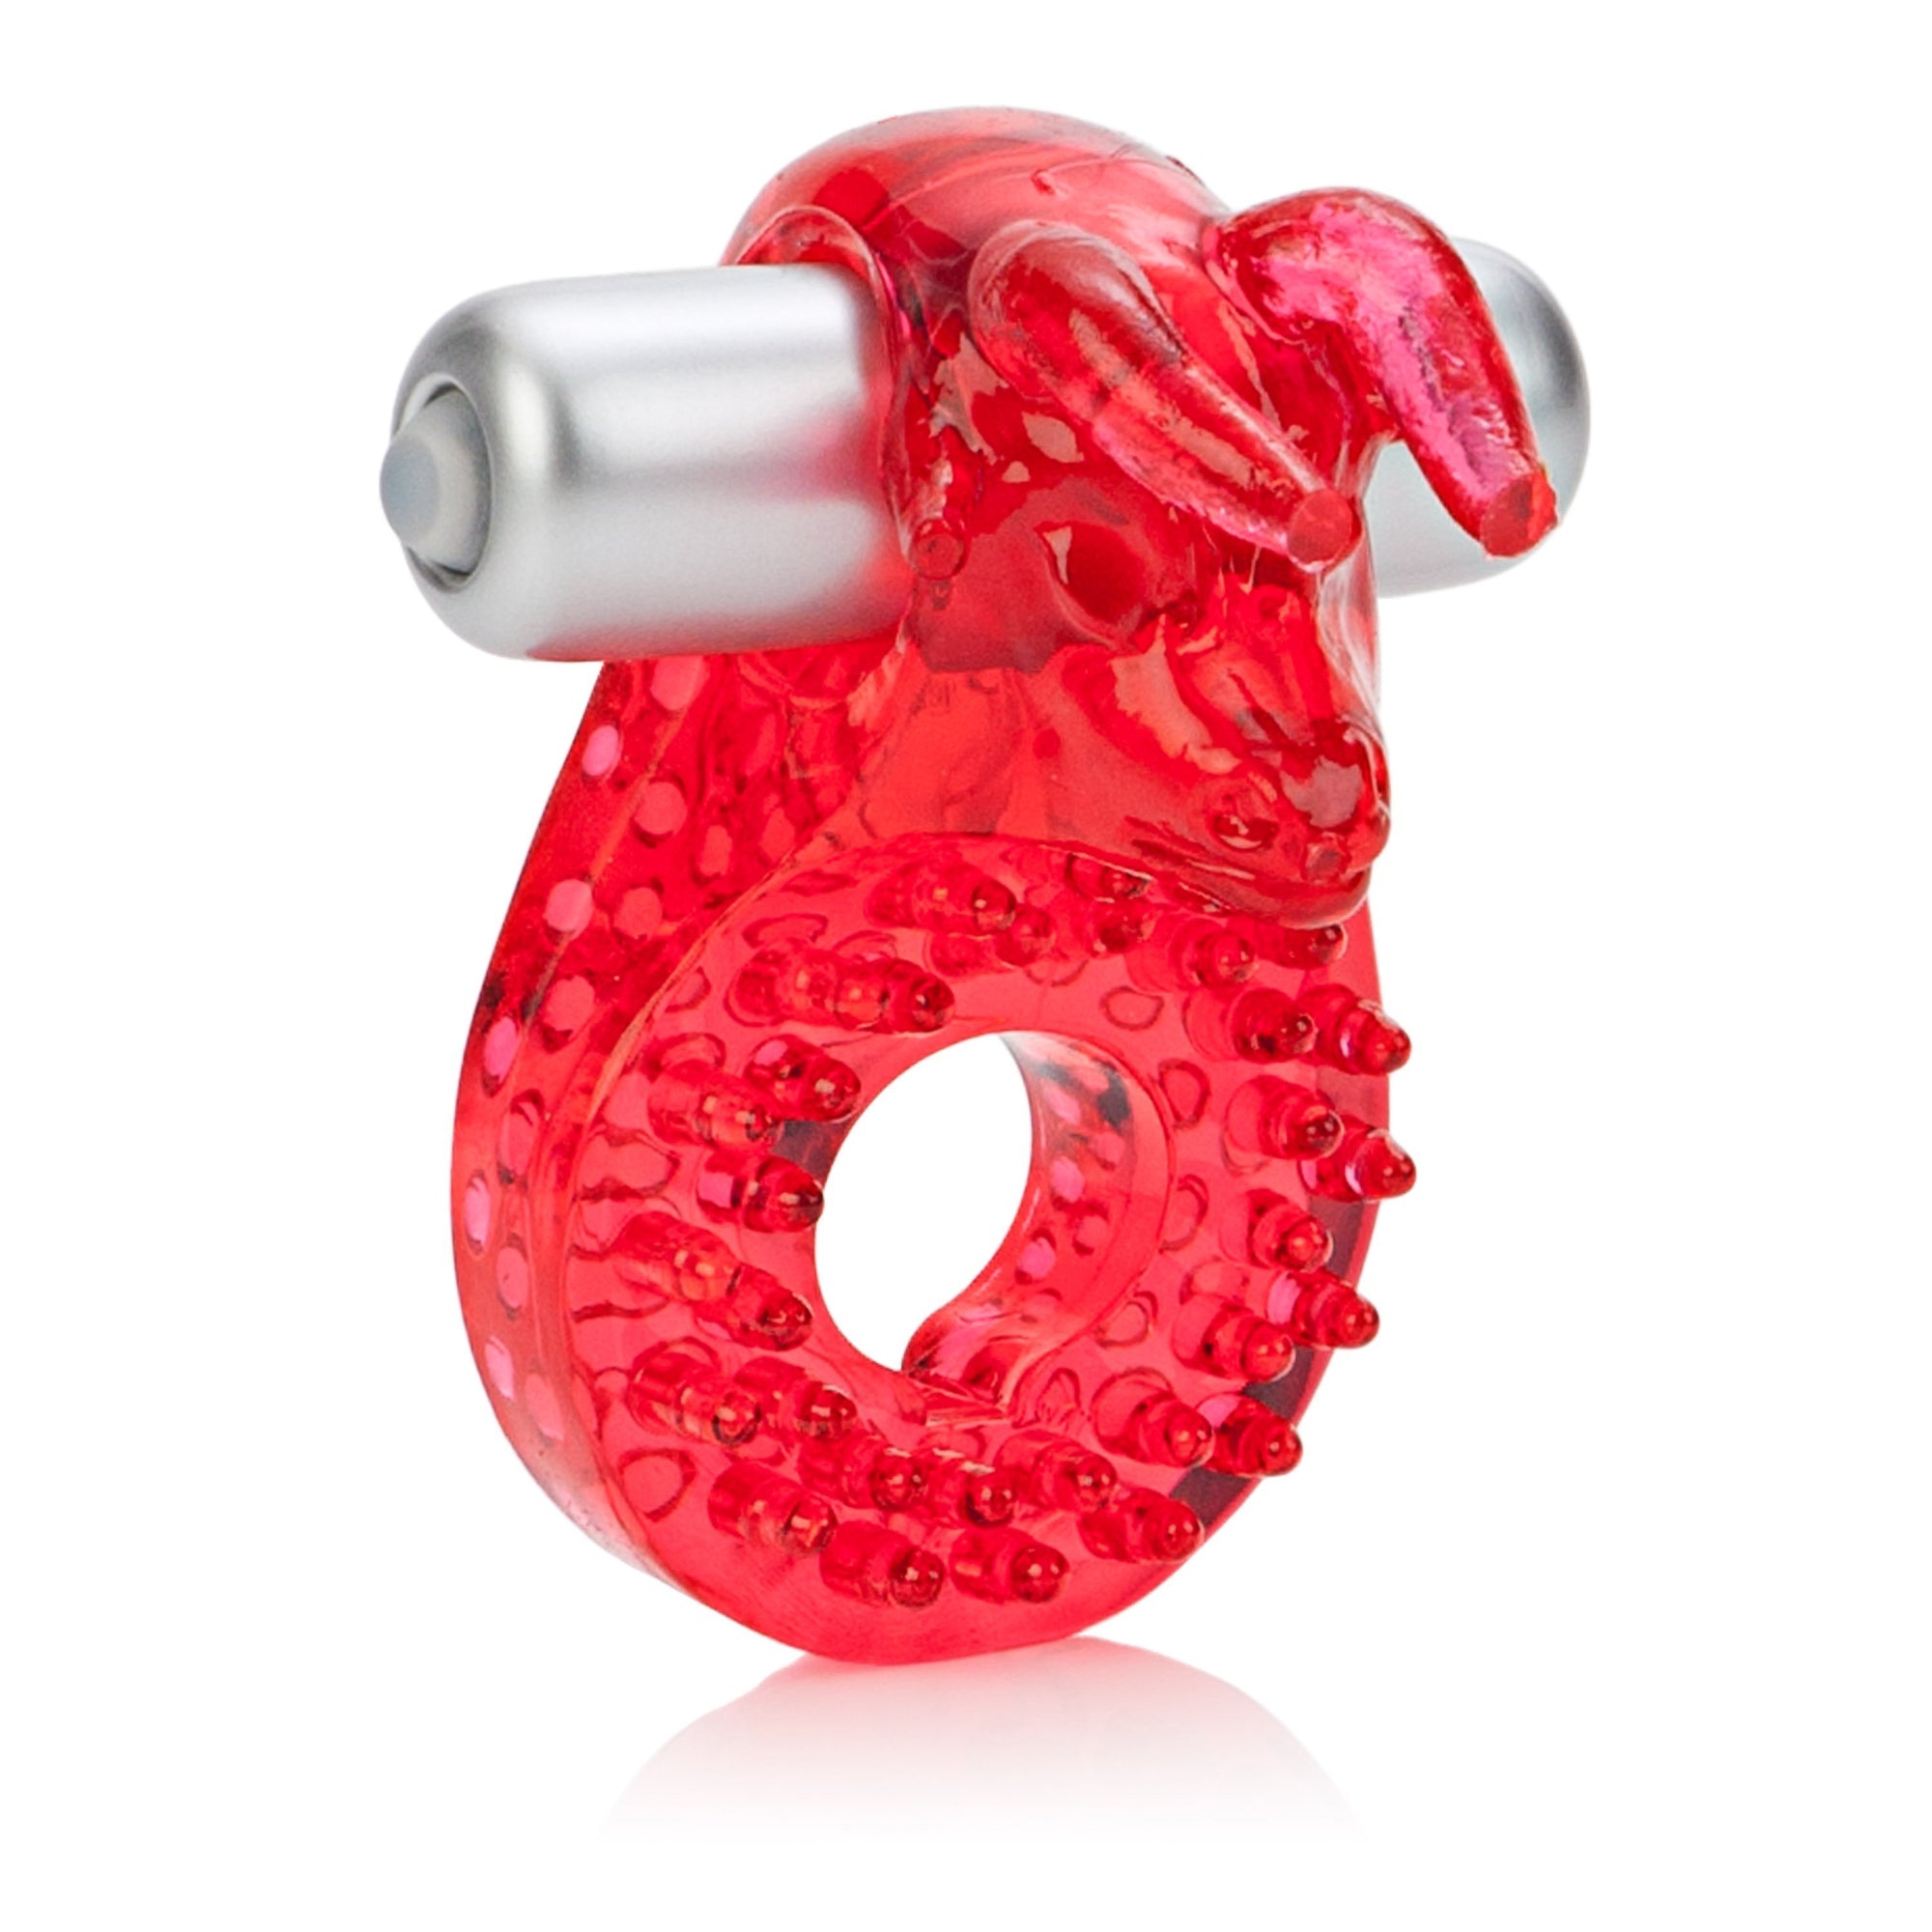 California Exotics - Couple's Raging Bull Vibrating Cock Ring (Red) Rubber Cock Ring (Vibration) Non Rechargeable Singapore